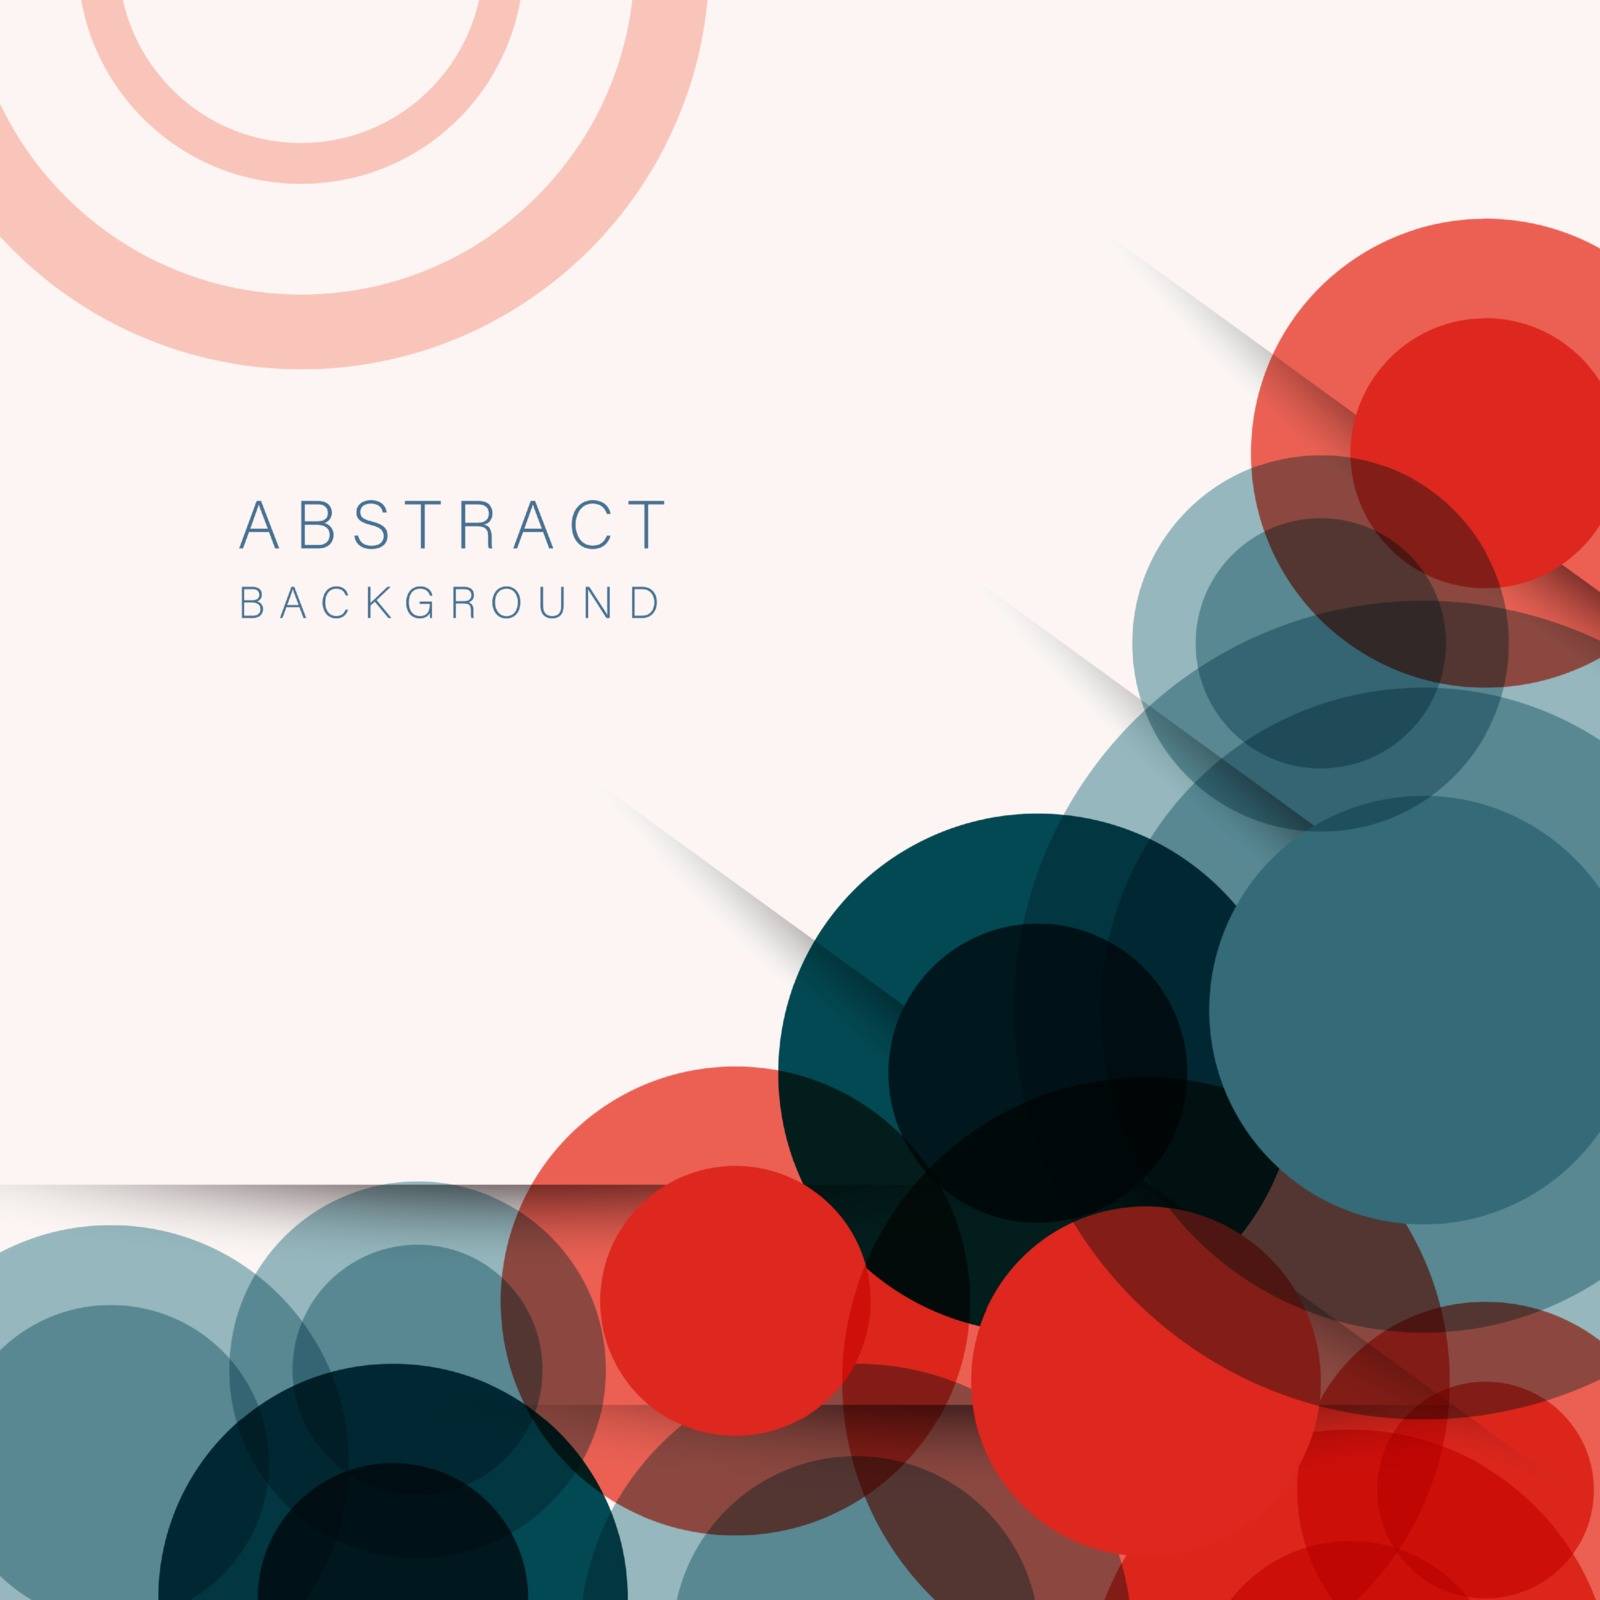 circle modern geometric backgrounds template, abstract illustration by Helenshi